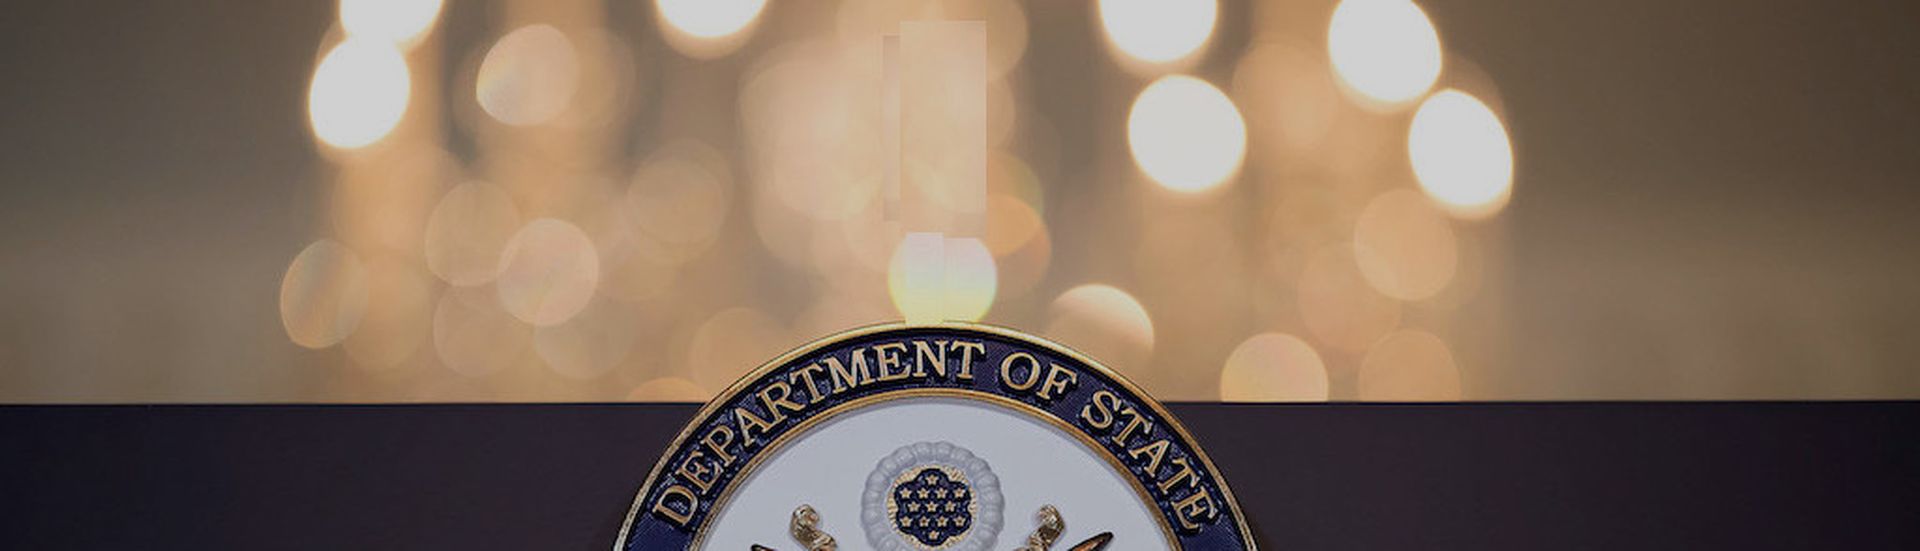 WASHINGTON, DC &#8211; JUNE 09:  A view of the State Department seal on the podium before Romanian President Klaus Iohannis and U.S. Secretary of State Rex Tillerson appear for a photo opportunity at the State Department, June 9, 2017 in Washington, DC. Iohannis is also scheduled to meet with President Donald Trump on Friday afternoon. (Photo by Dr...